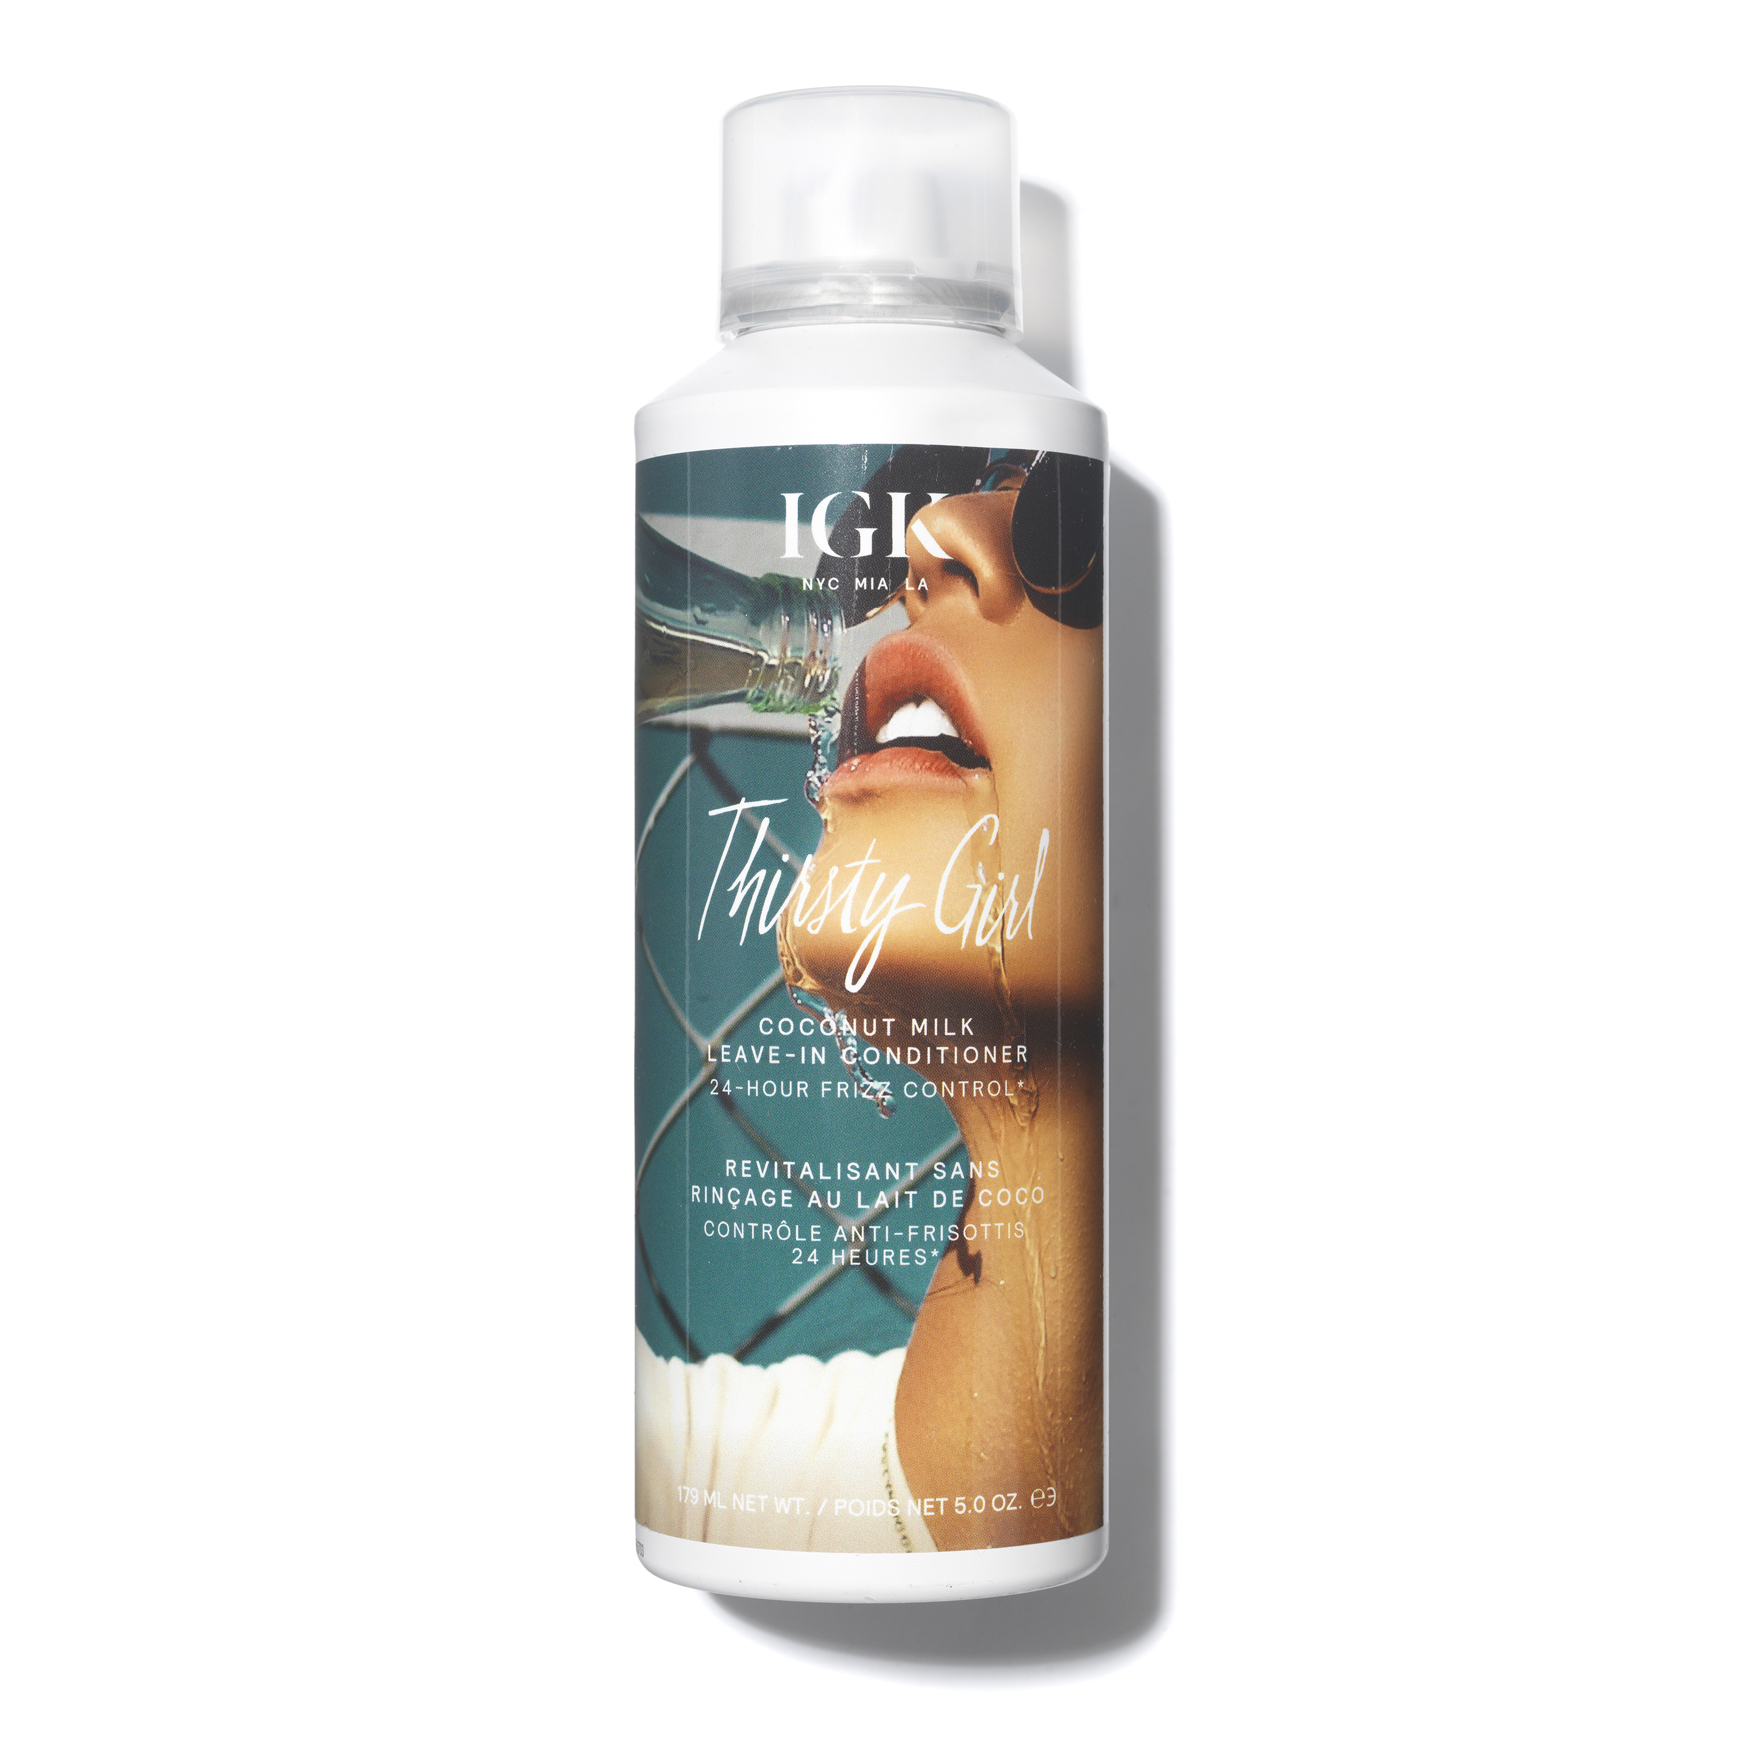 IGK Hair Thirsty Girl Coconut Milk Leave-in Conditioner 24-Hour Frizz Control